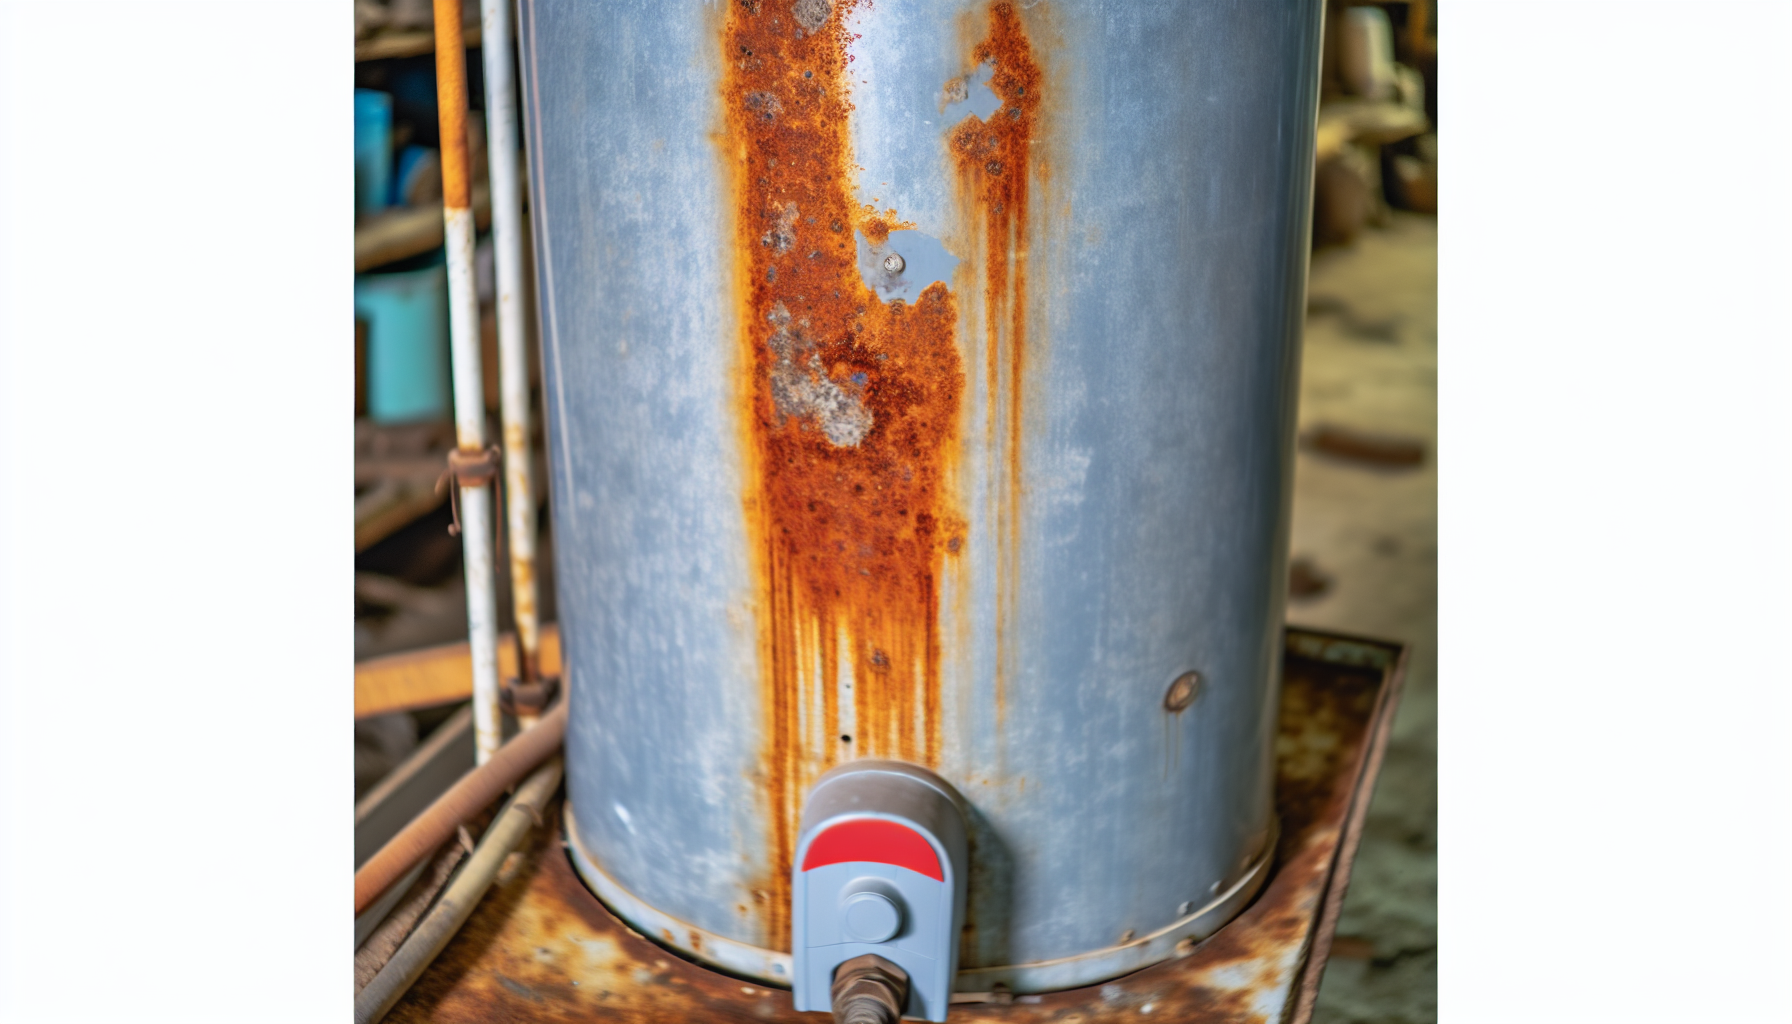 Water heater with rust and corrosion